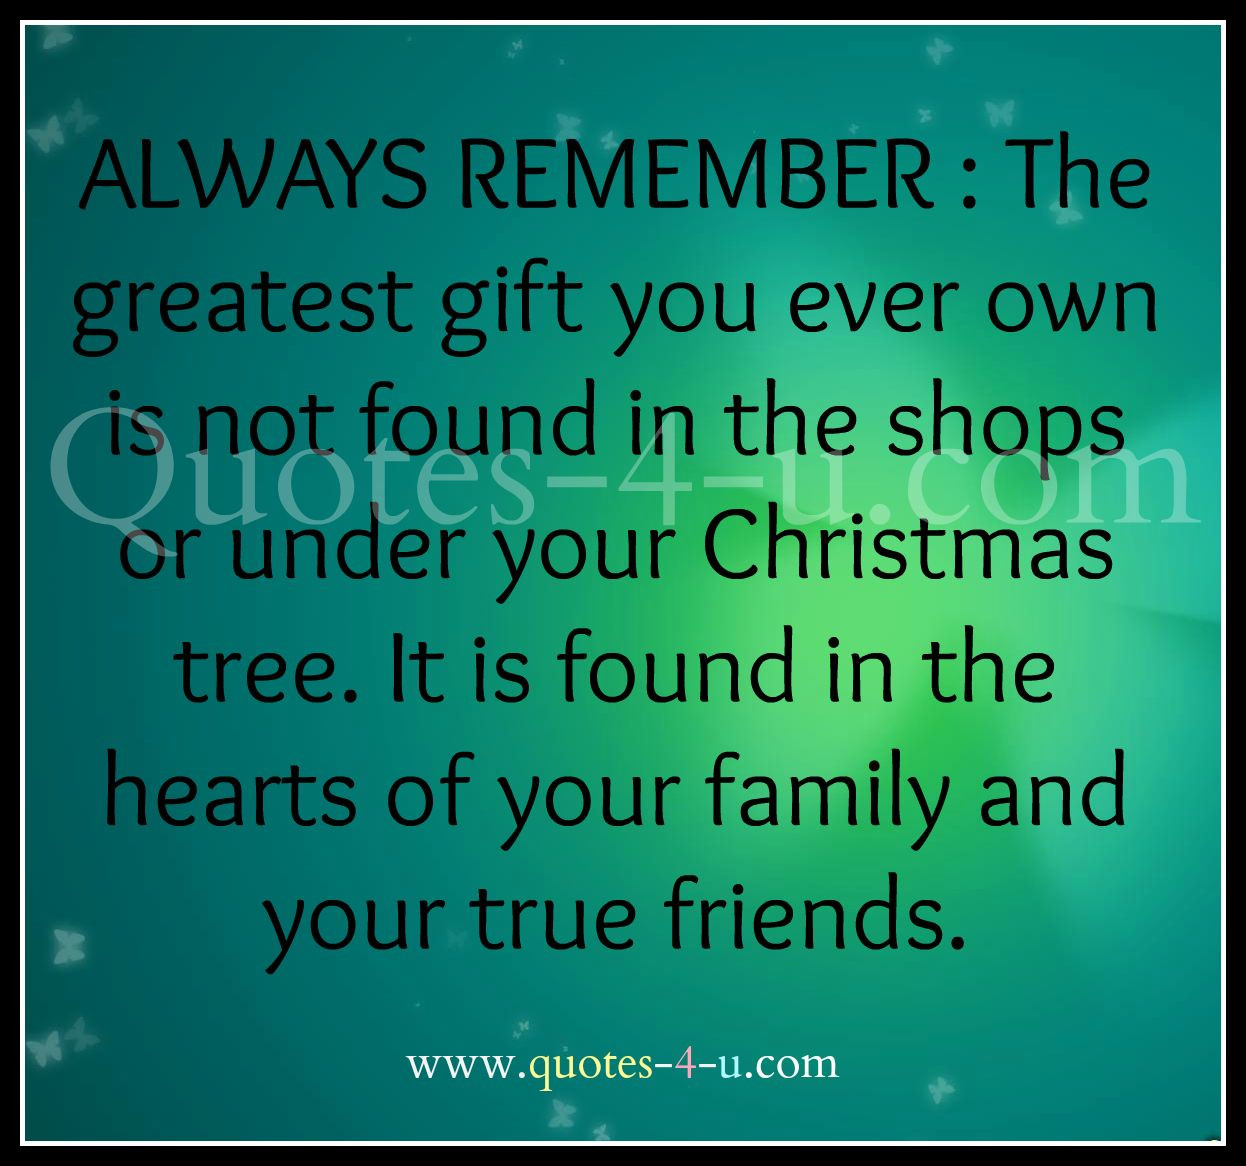 Friends Being Family Quotes
 family friends inspirational quotes wallpaper Quotes About